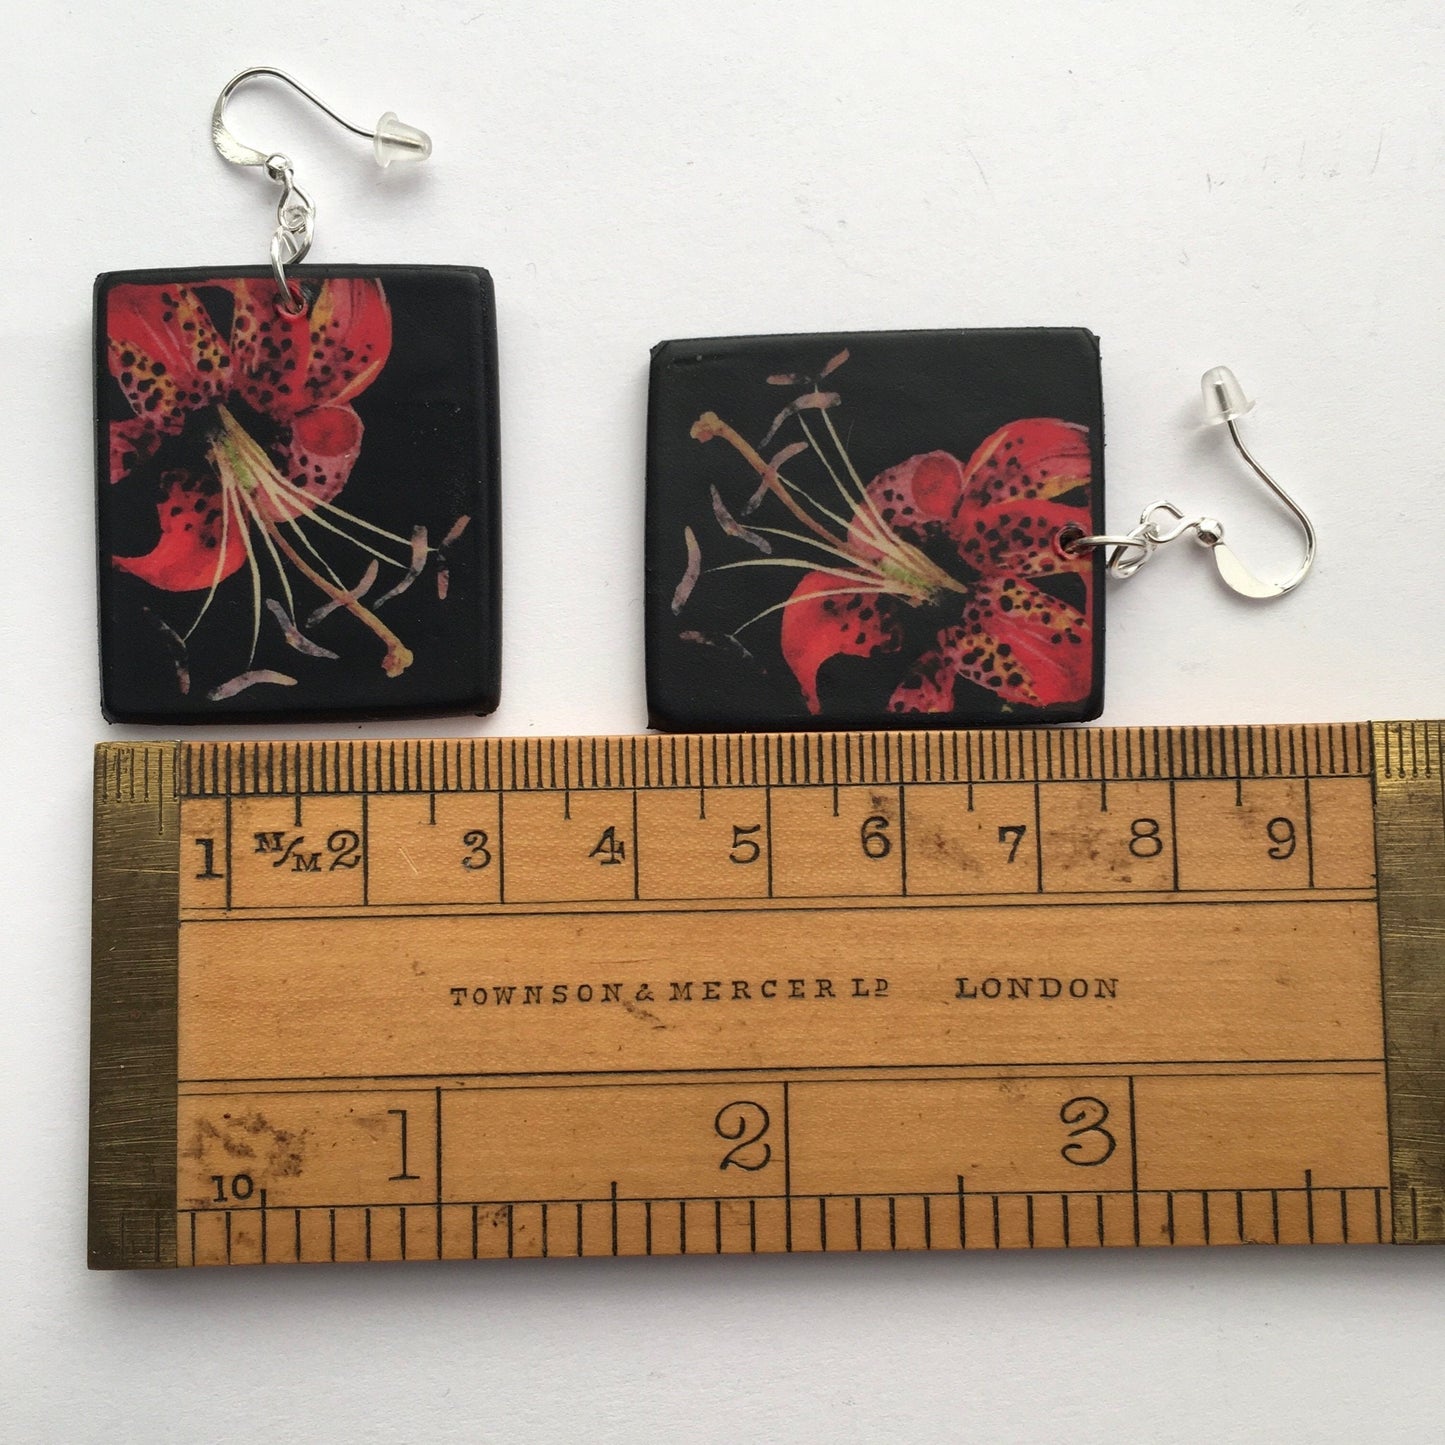 Inspired by Mary Delany  red lily floral art collage Obljewellery handmathe these aesthetic, artsty earrings on sustainable wood and plated silver art earrings. Each  is 3.5 cm x 3 con x2mm.